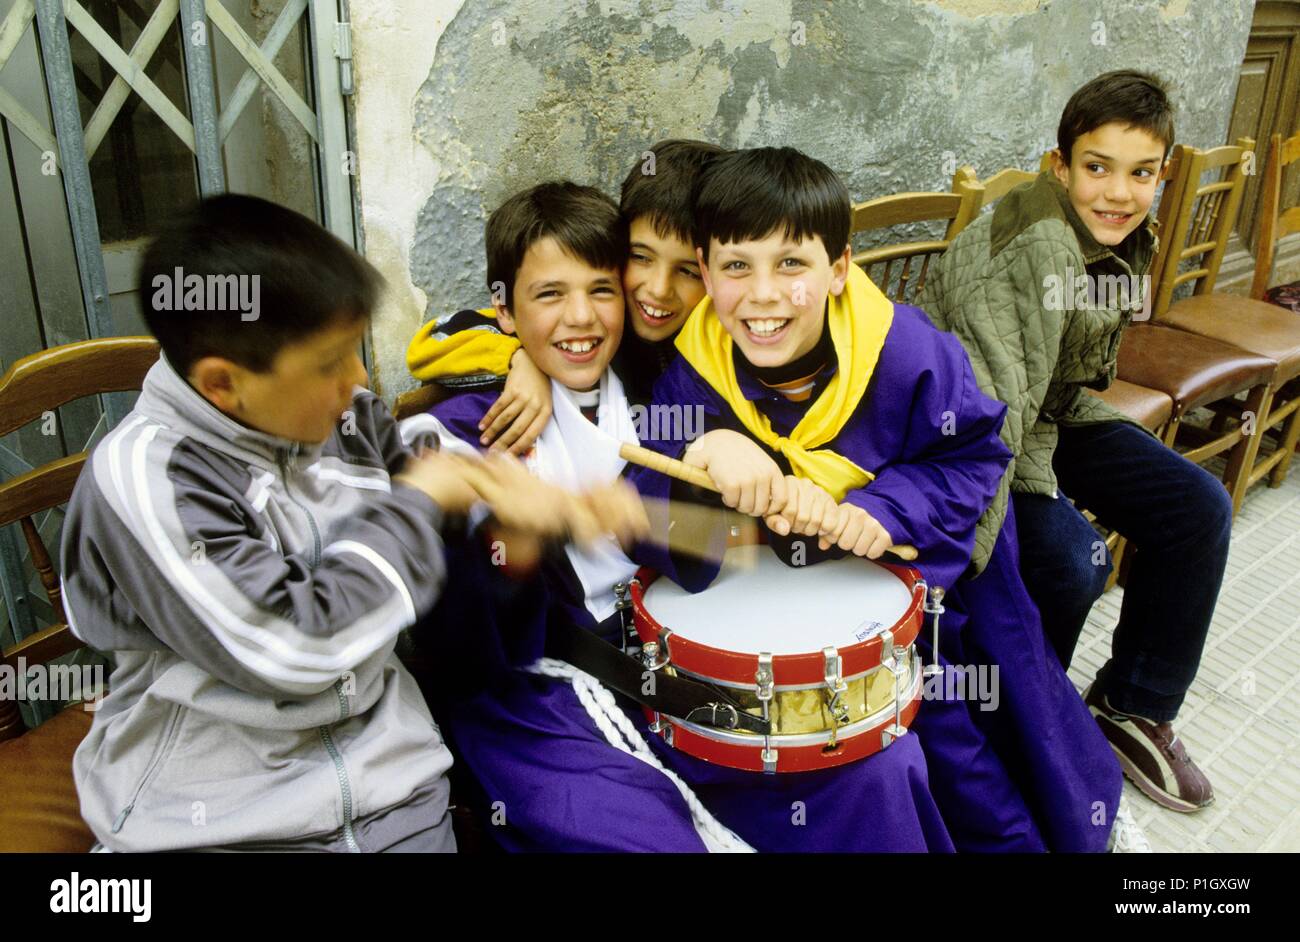 Hellín; Hellín; children with religious dressing playing drums during Holy Week / 'tamborada' (big drums procession). Stock Photo